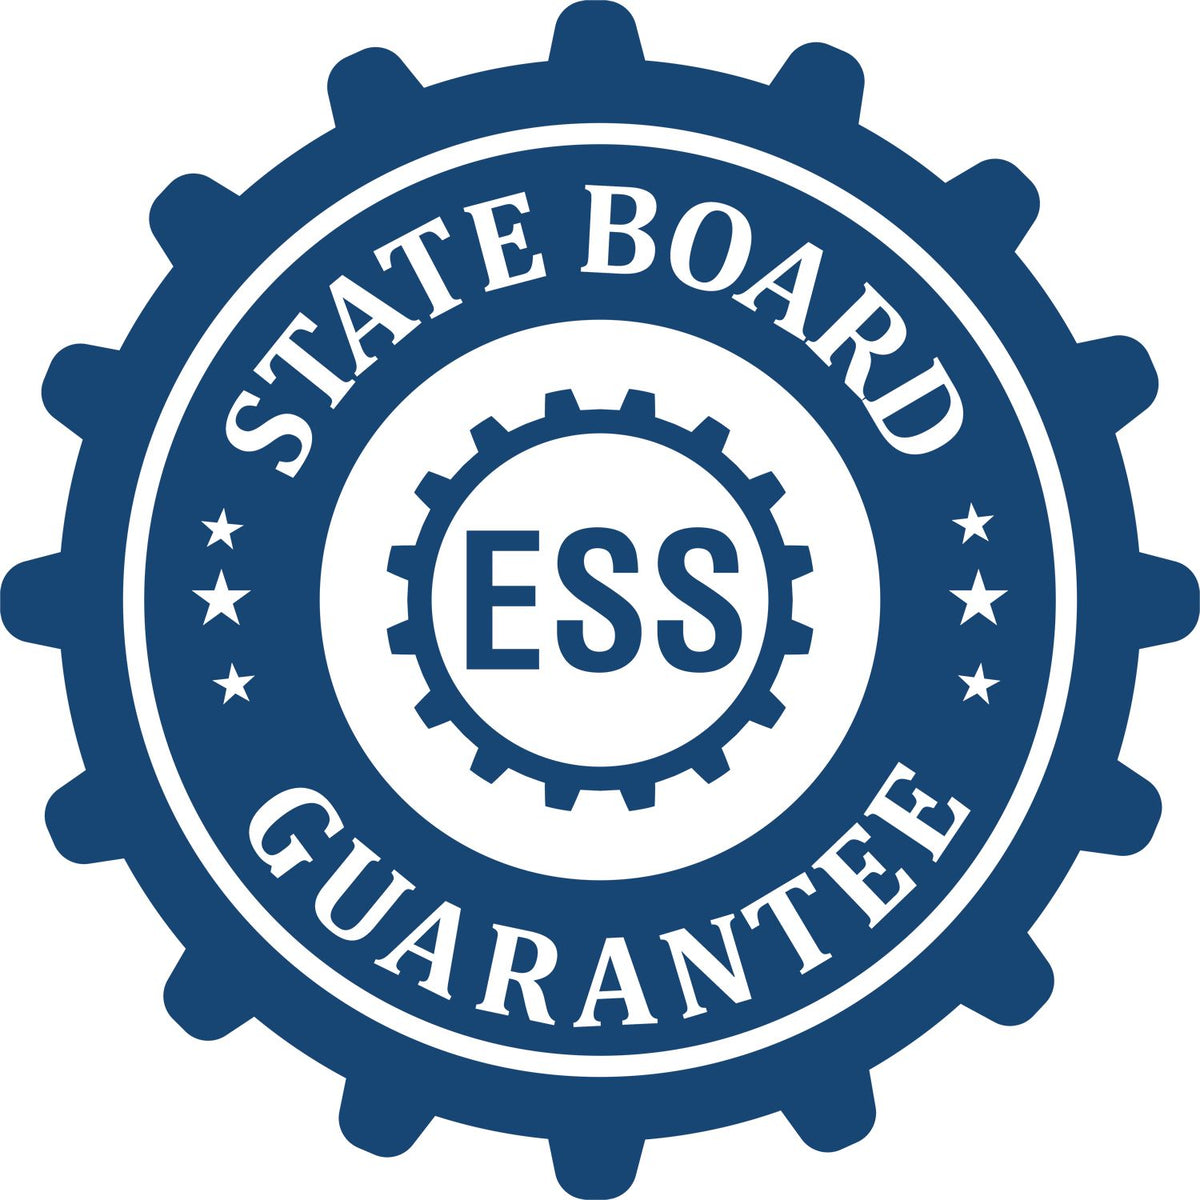 An emblem in a gear shape illustrating a state board guarantee for the Hybrid South Dakota Geologist Seal